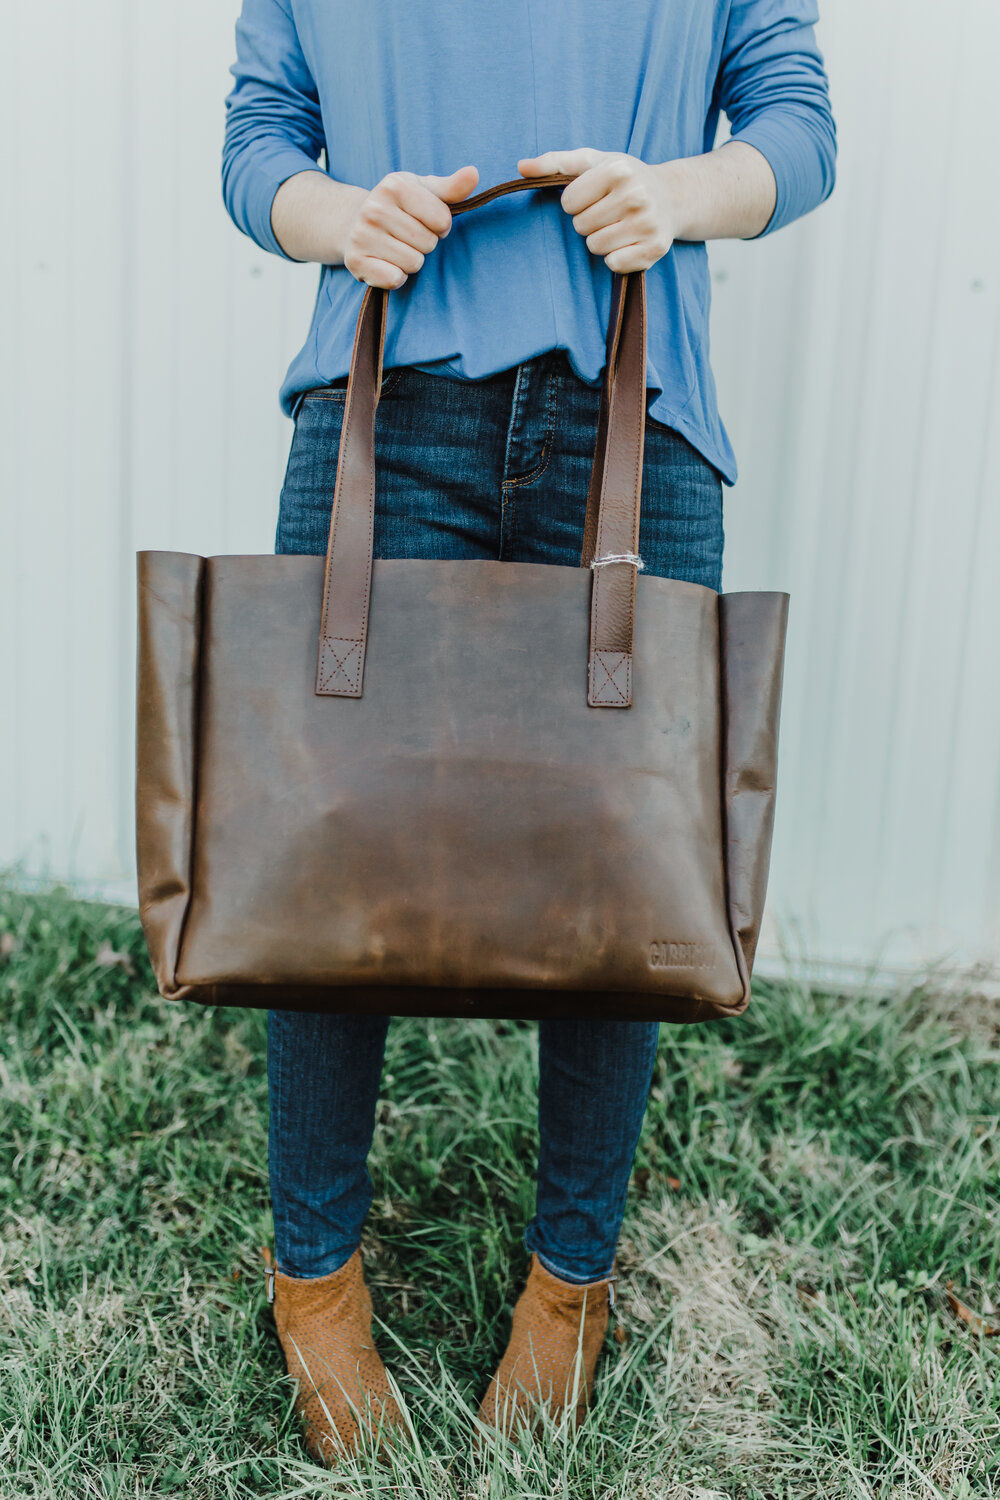 Leather Bags & Totes, Timeless Styles